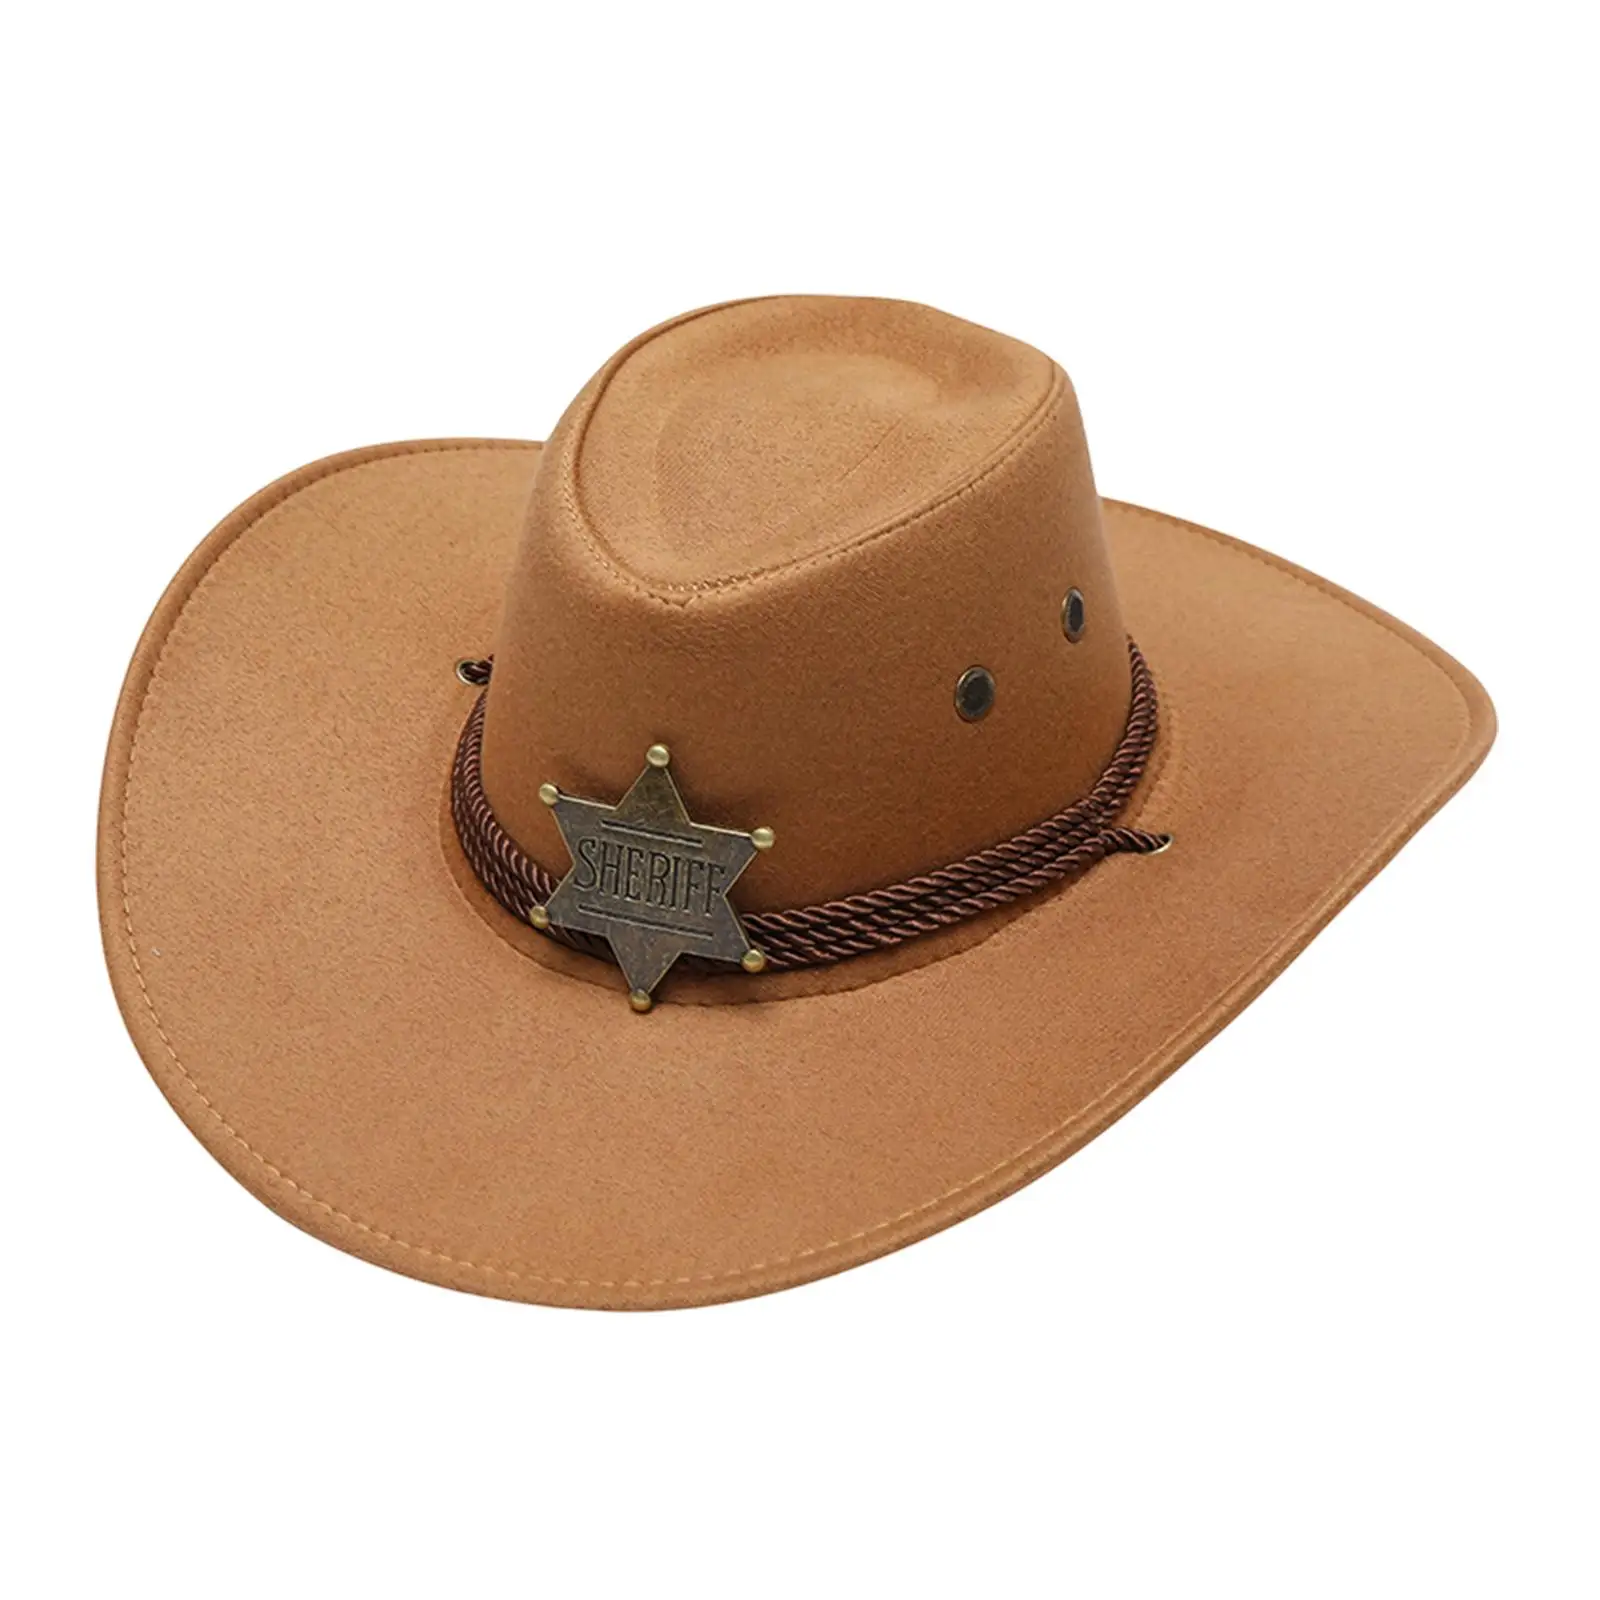 Cowboy Hat Wide Brim Unisex Adult Comfortable Sunhat Cowgirl Hat Sun Hat for Fishing Street Holidays Hiking Stage Performance